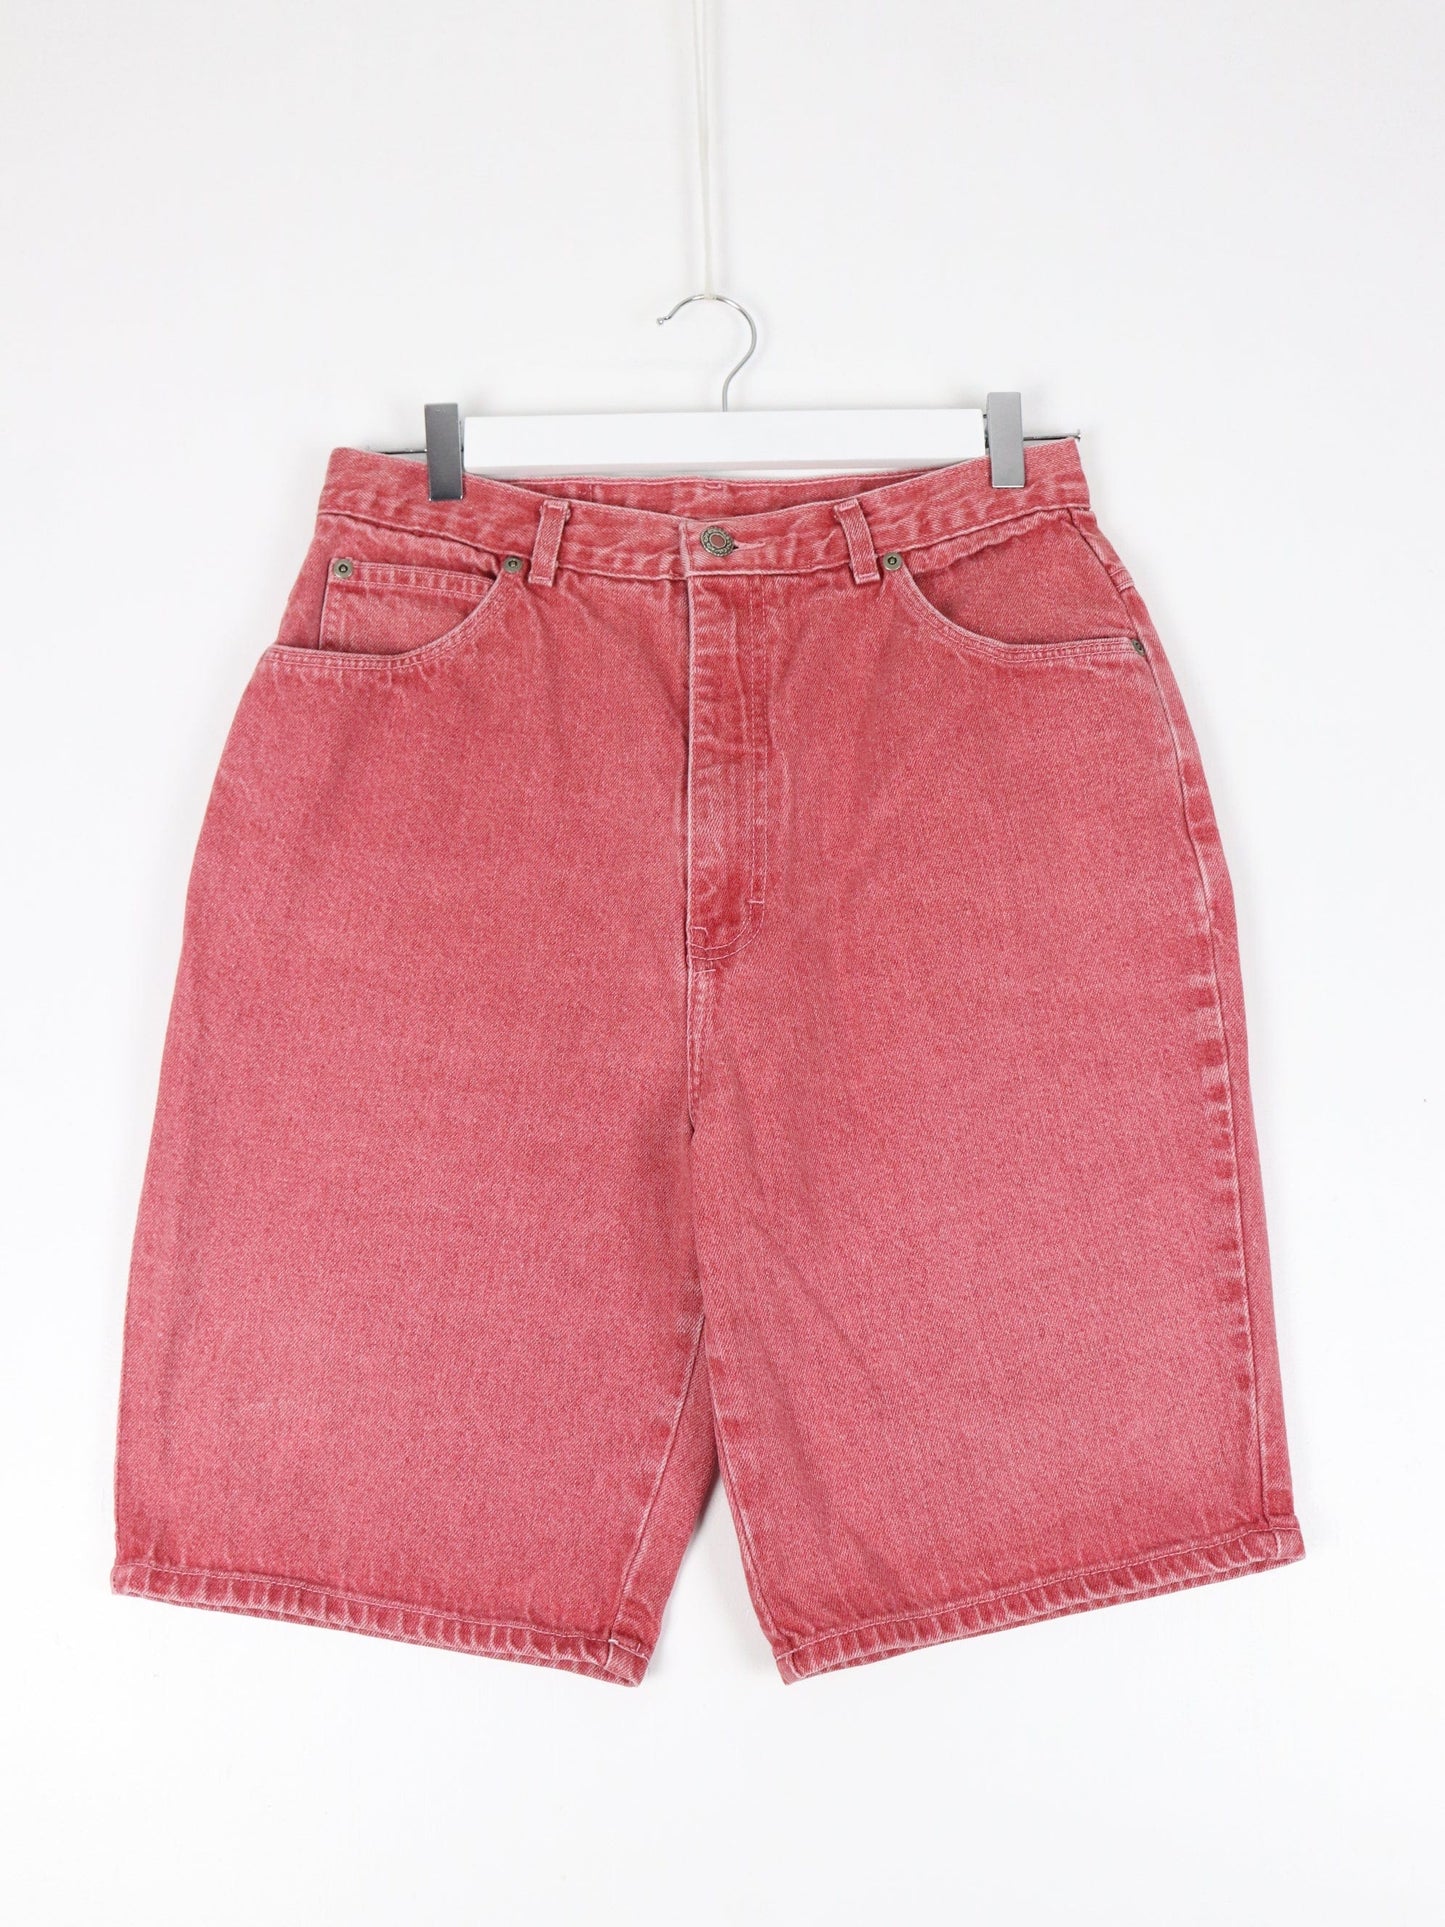 Other Shorts Vintage Bonjour Shorts Womens 14 Pink Denim Jeans 90s Casual